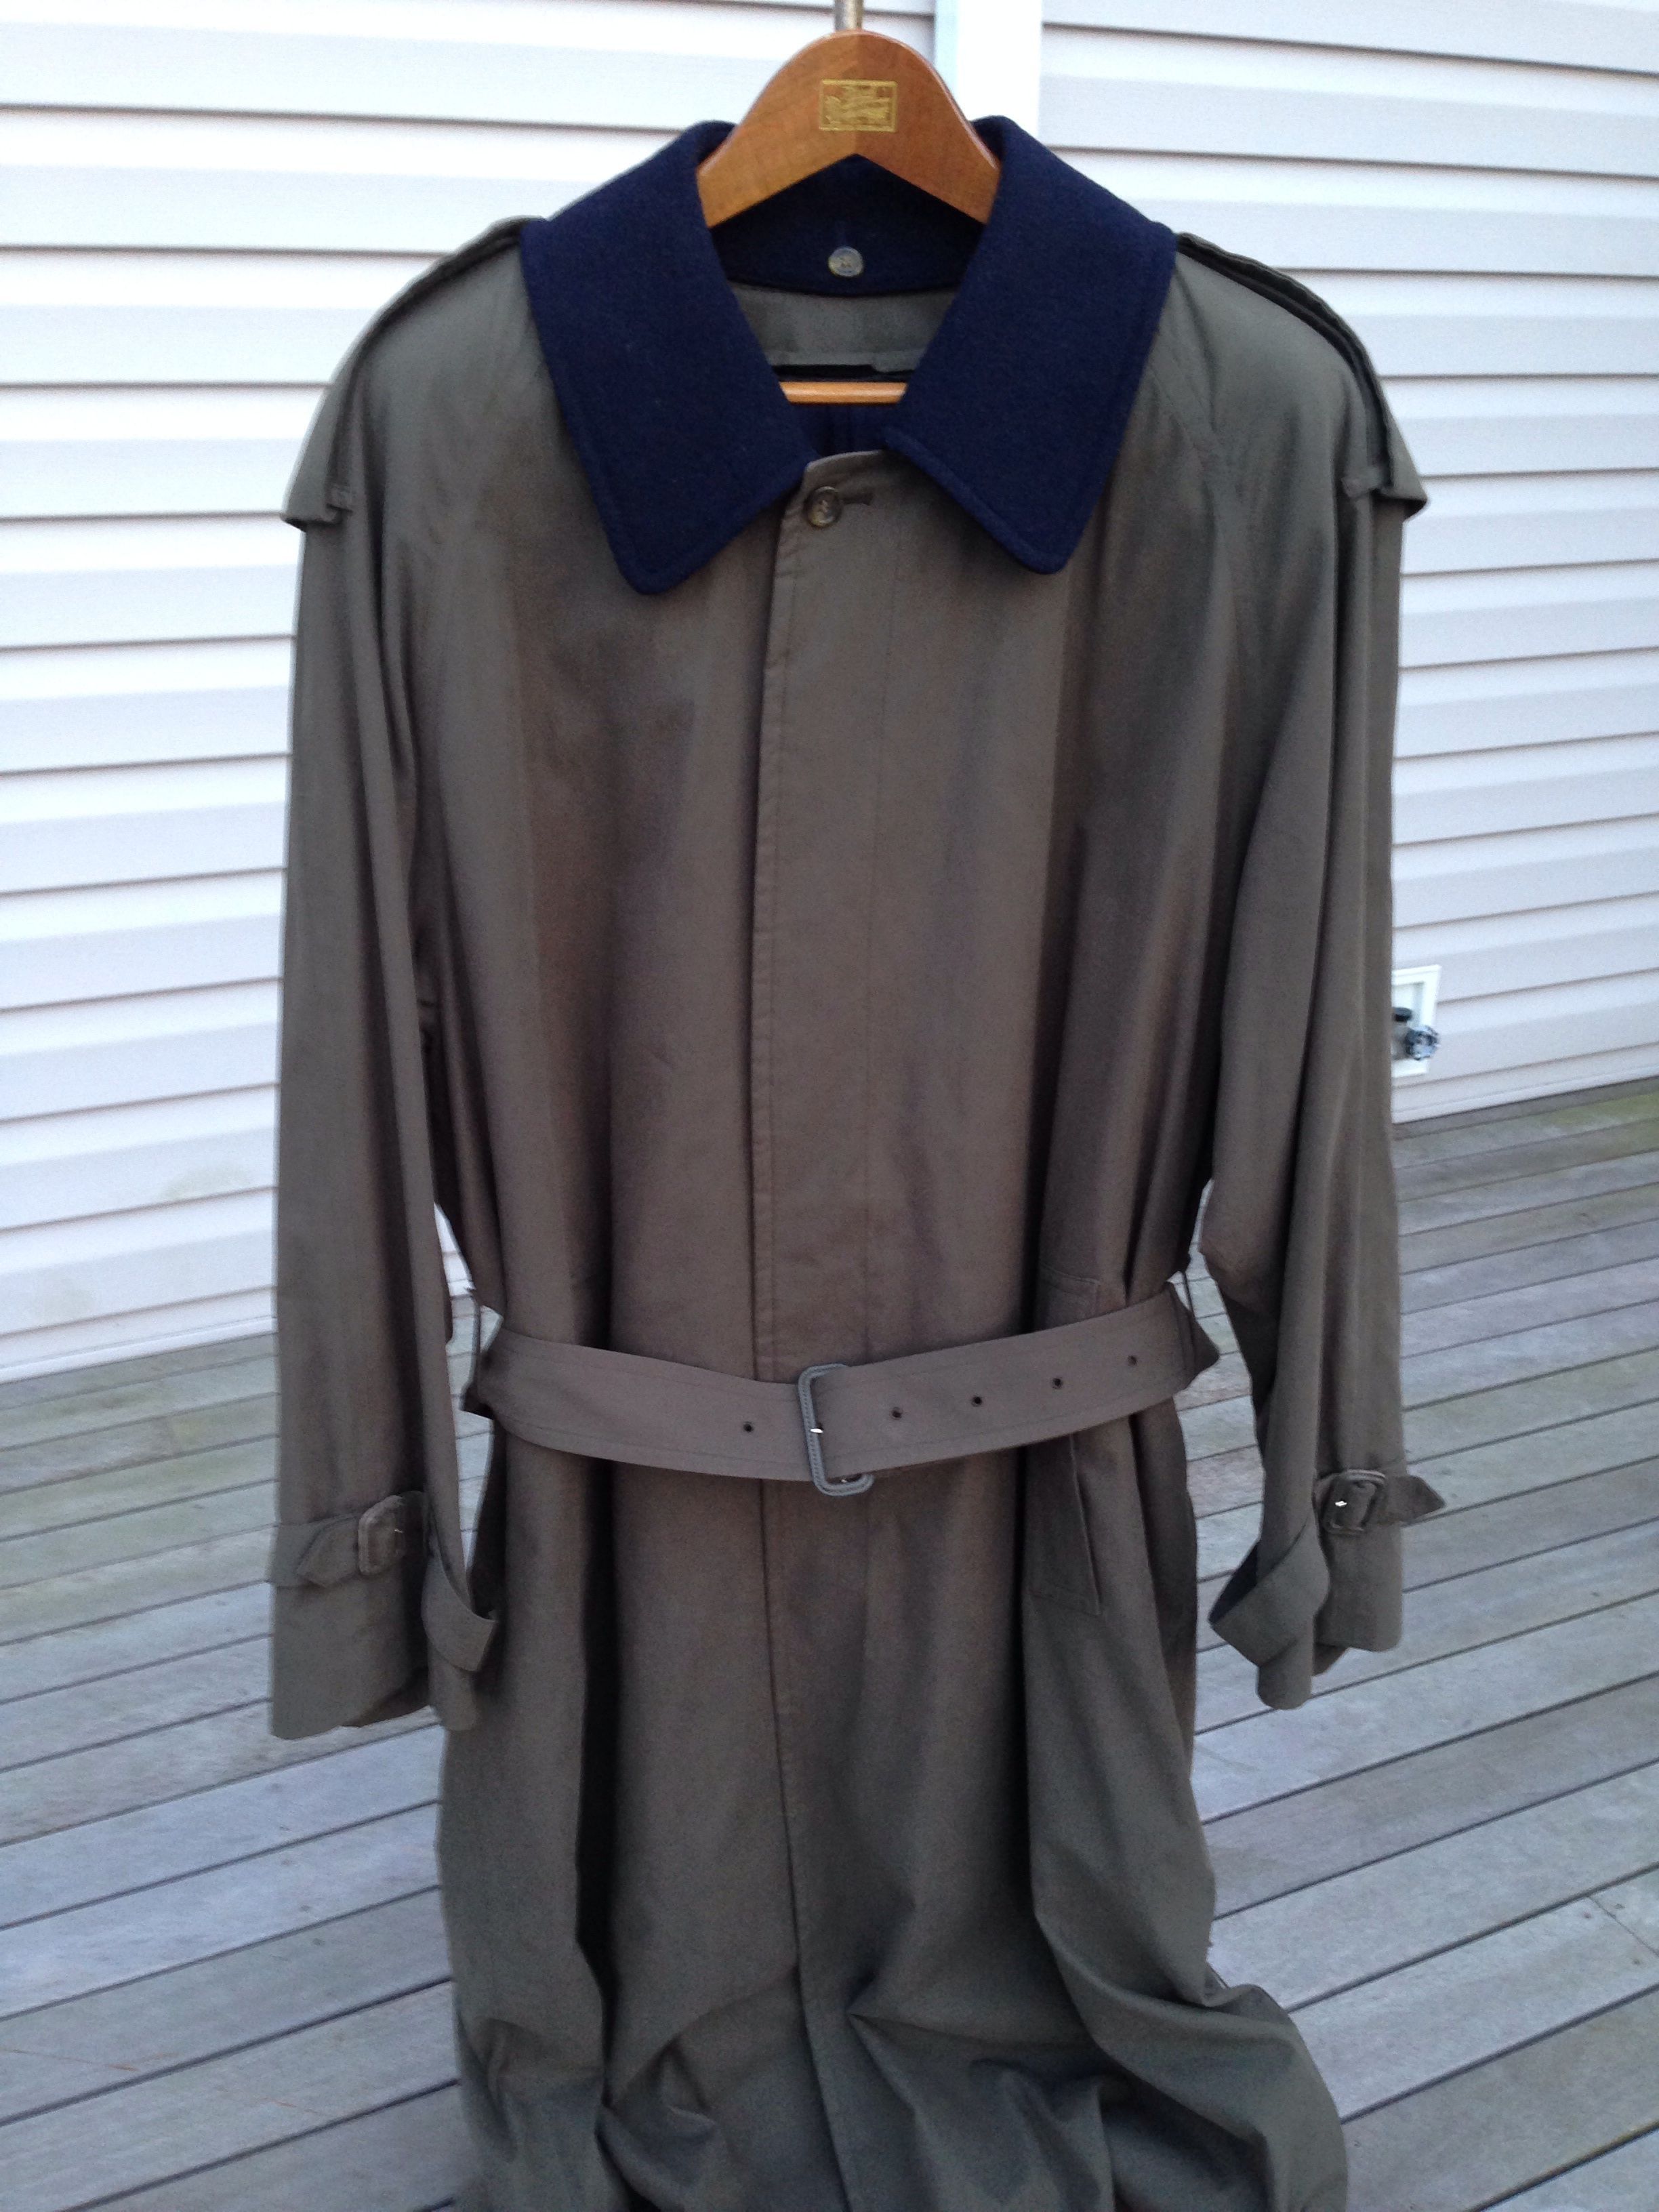 burberry trench coat with removable lining